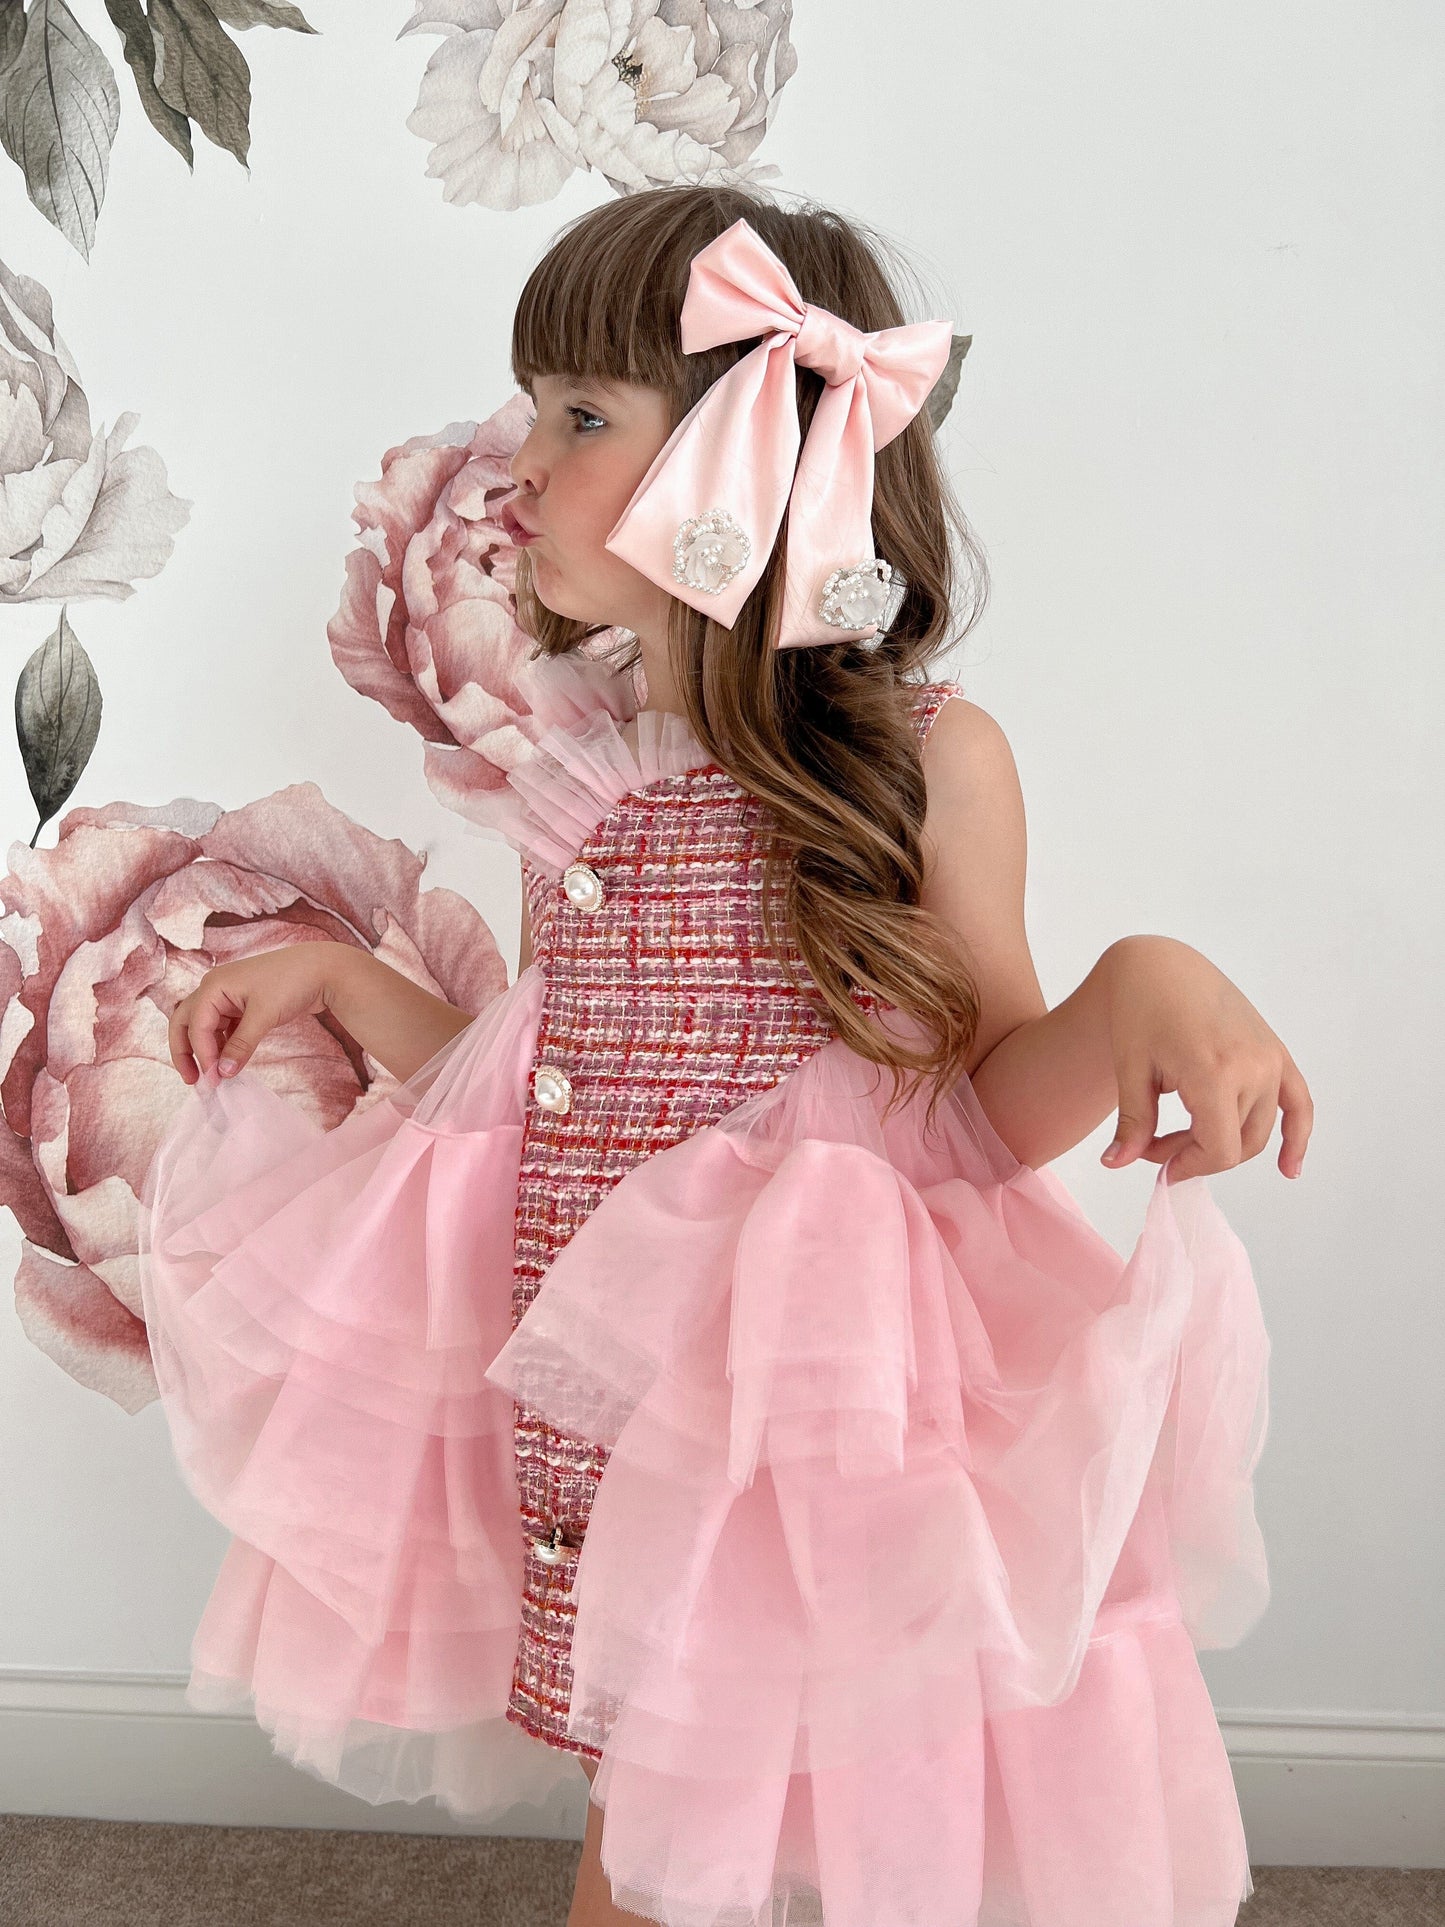 Anise Satin Embroidered Hair Bows - Ballet Pink